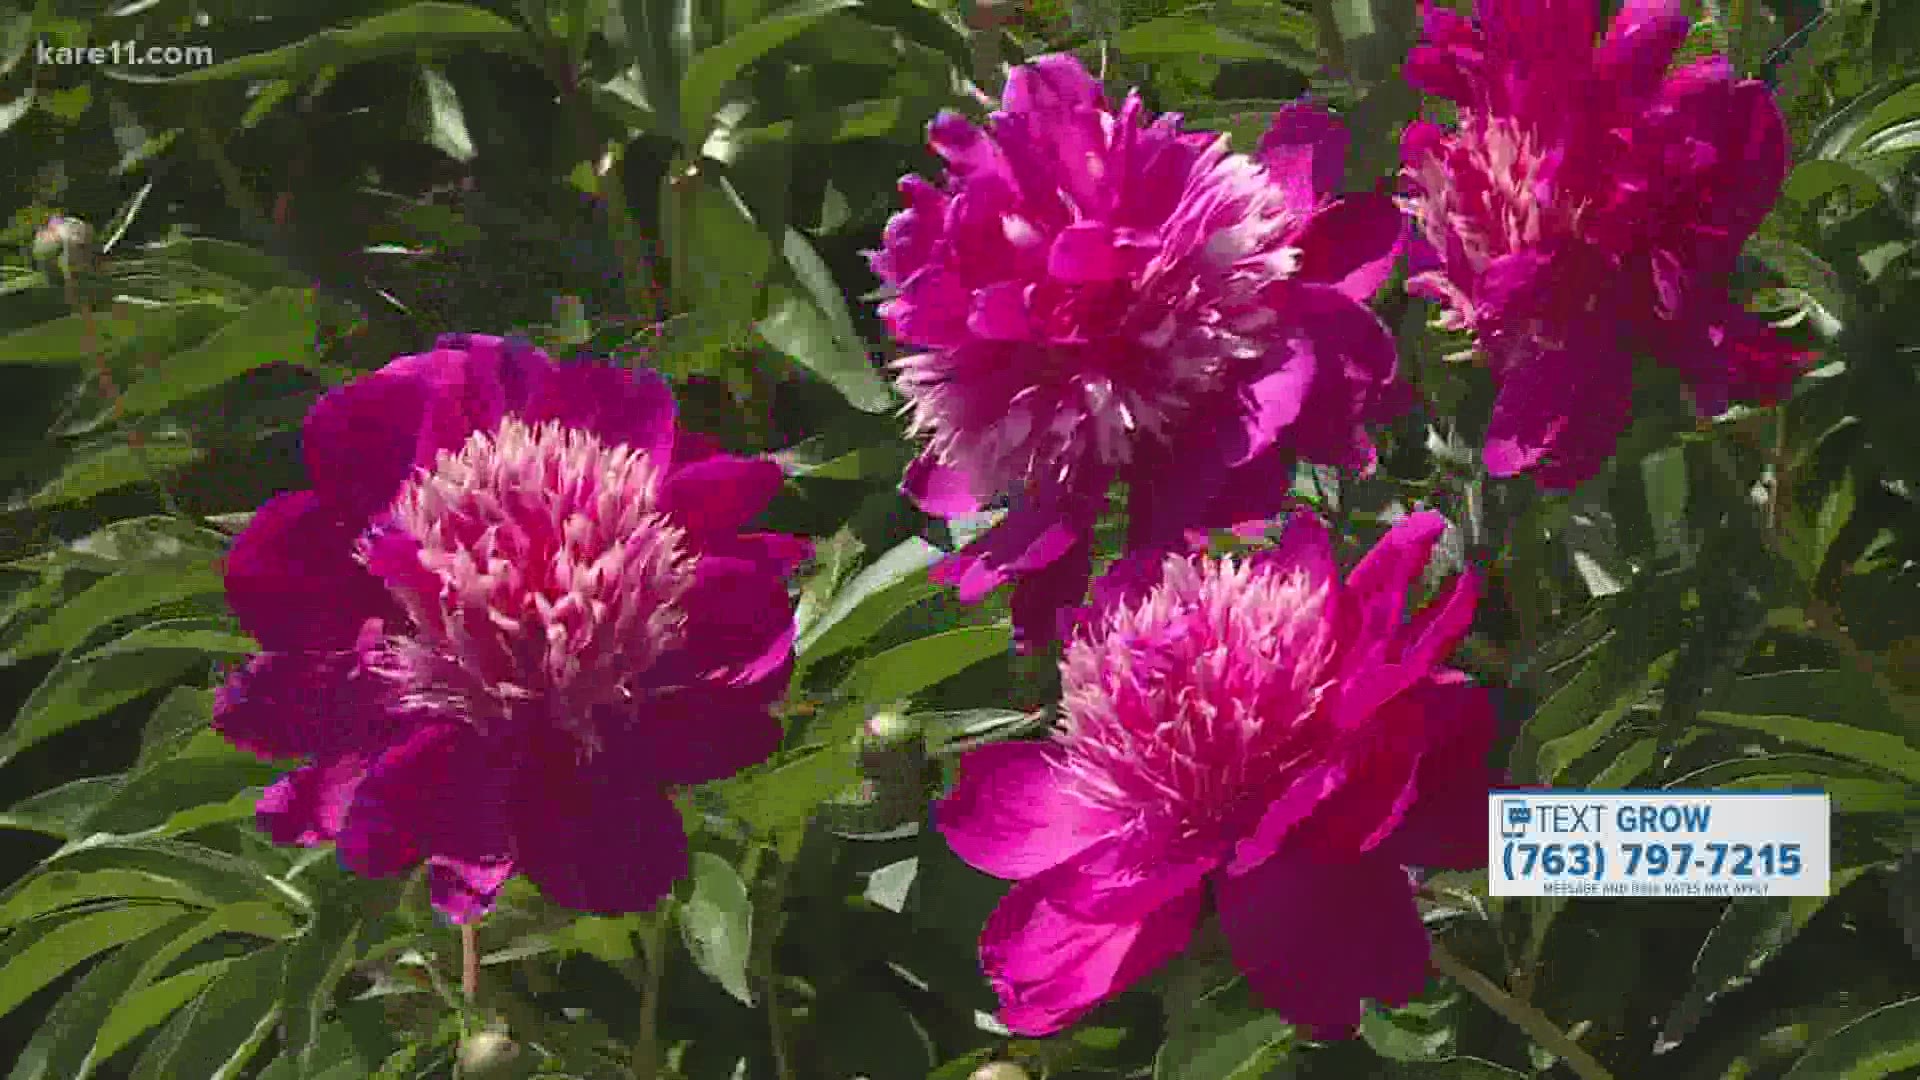 Who better to give advice on our peonies than a Delano man who grows thousands of them!